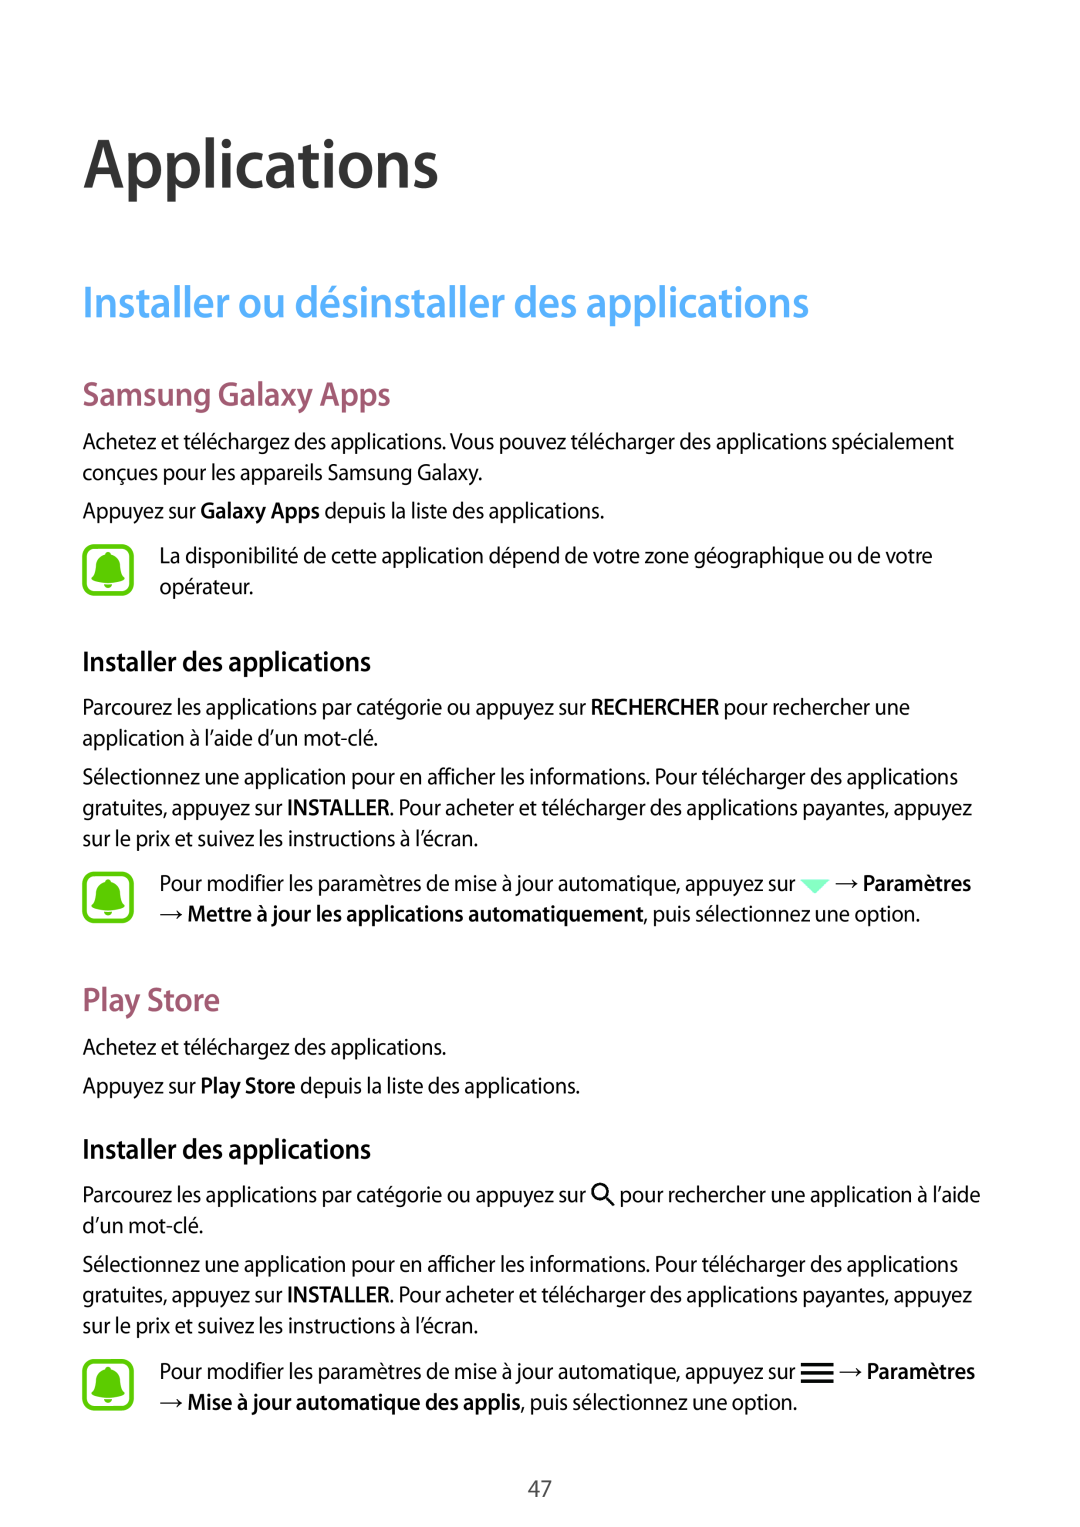 Samsung SM-G920FZDAXEF manual Applications, Installer ou désinstaller des applications, Samsung Galaxy Apps, Play Store 